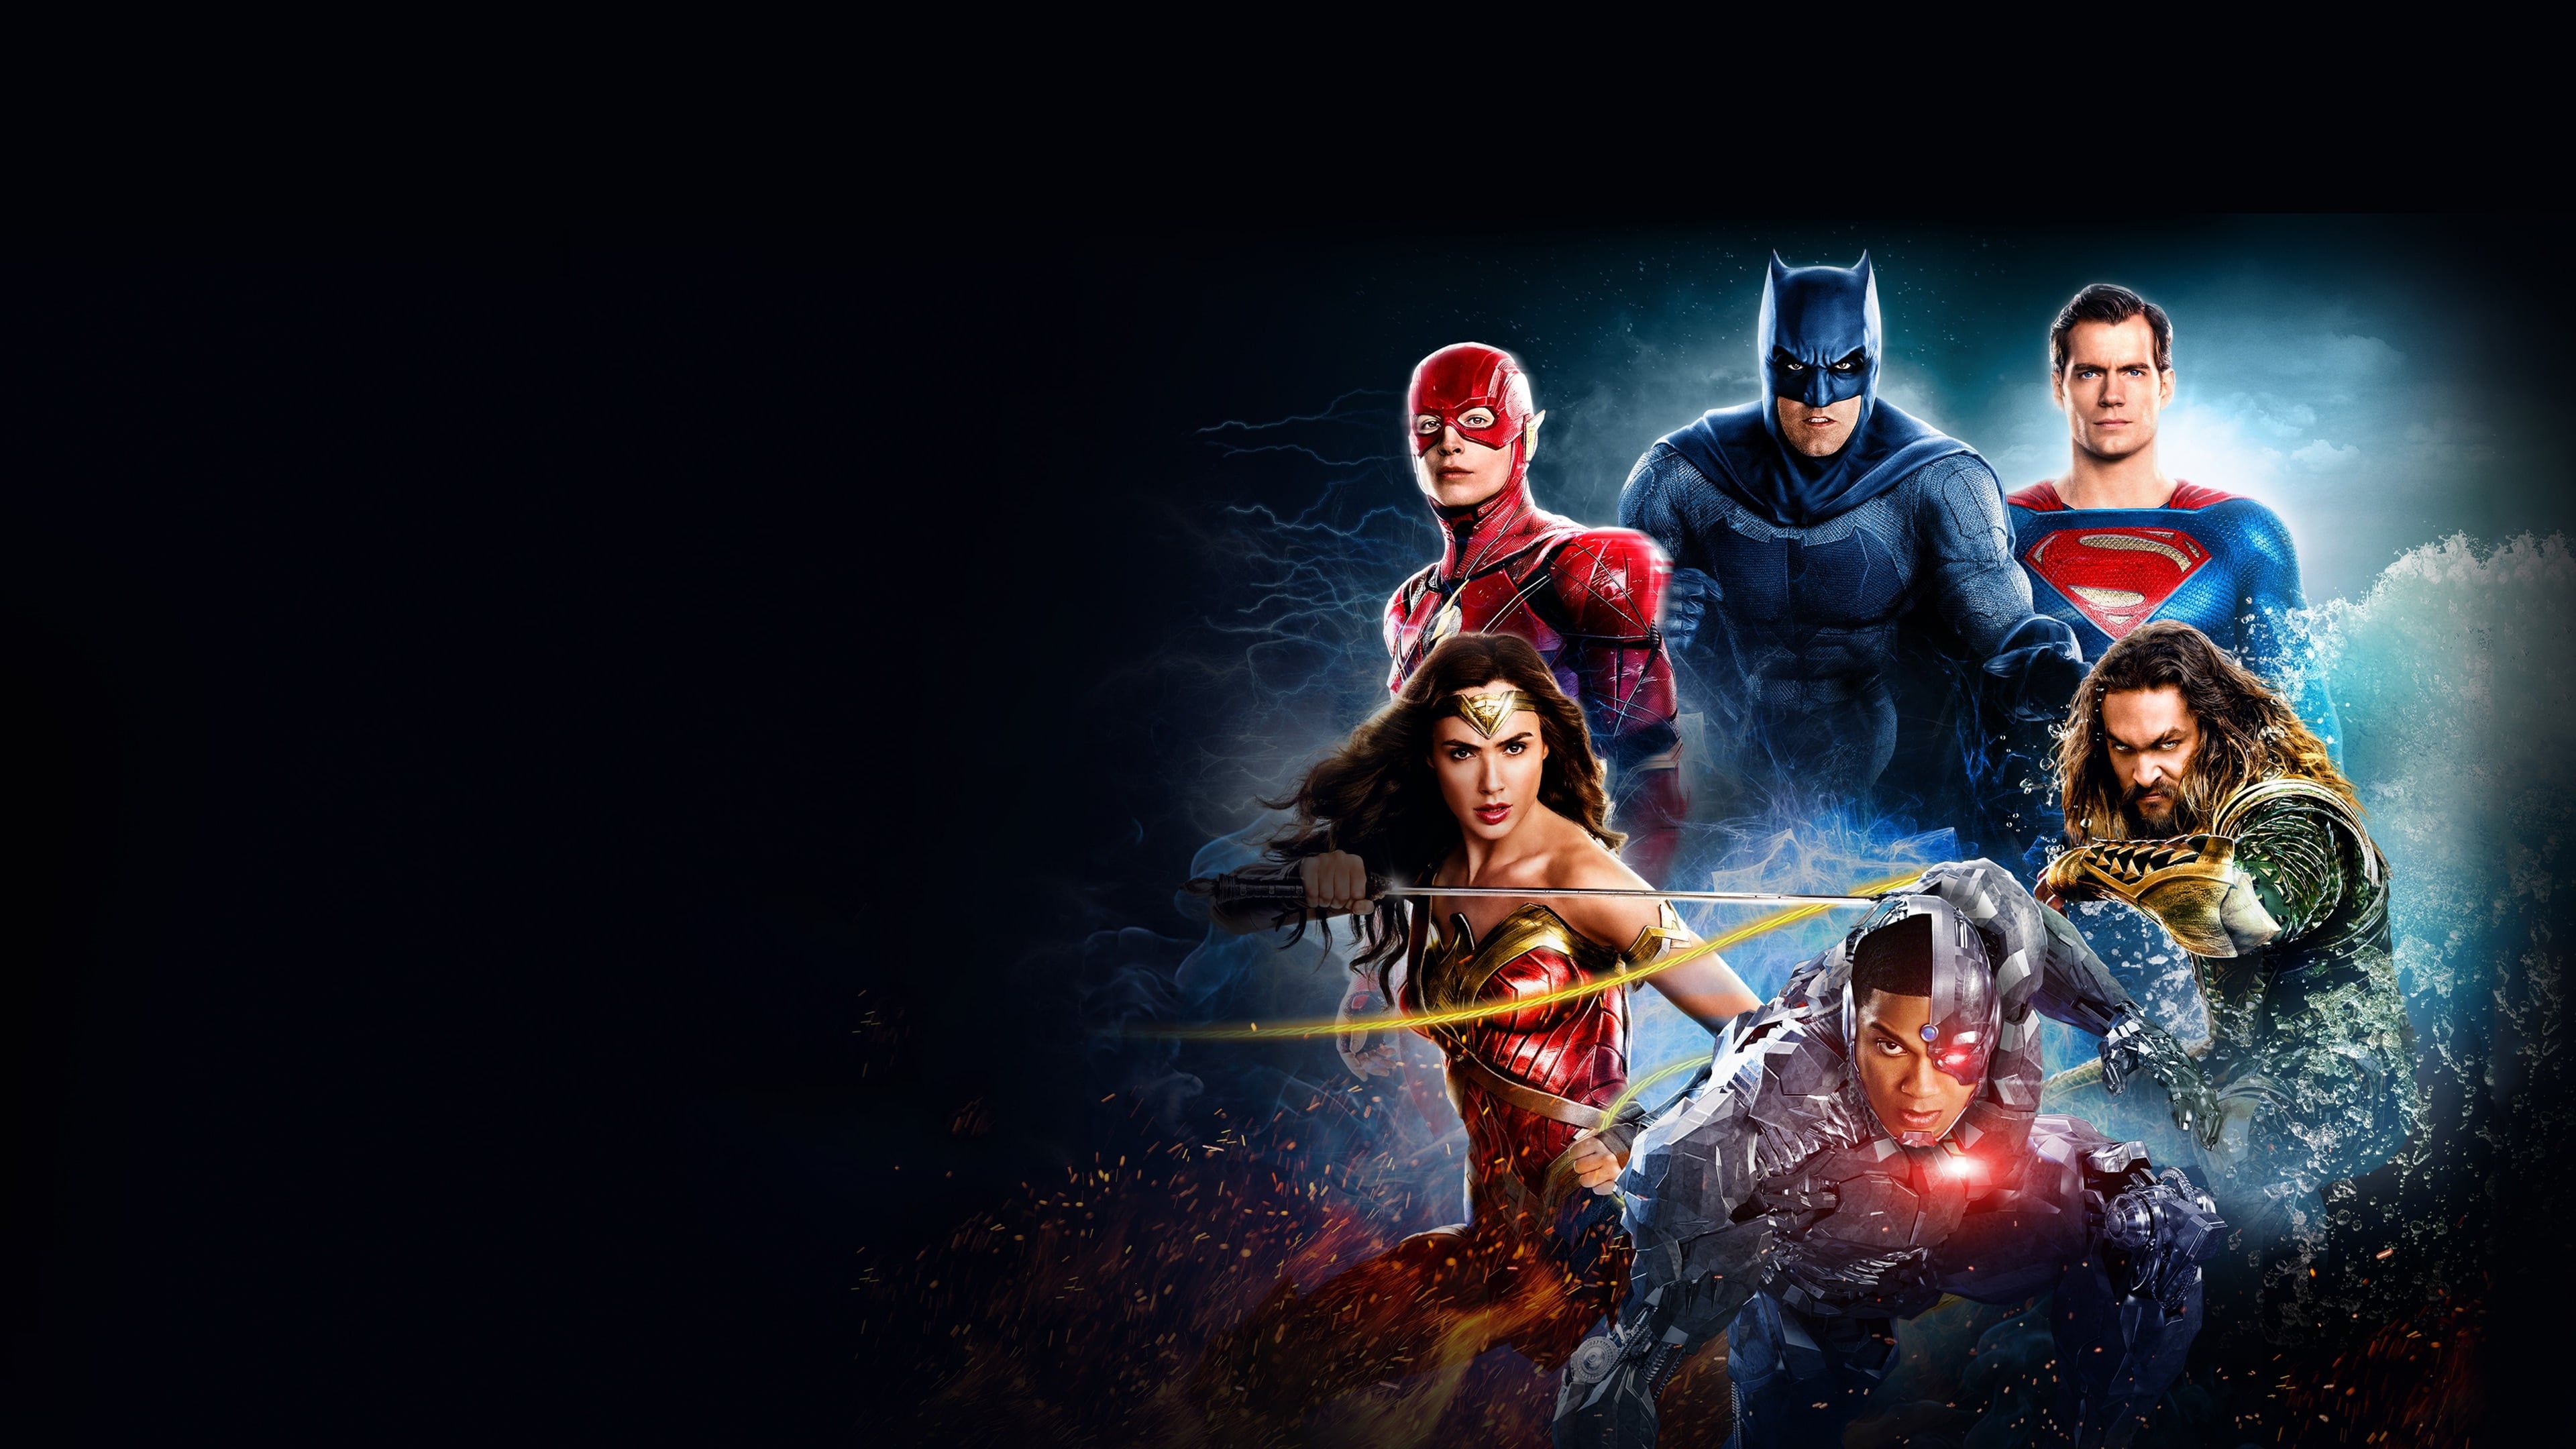 HBO Justice League Synder Cut 2021 2560x1080 Resolution Wallpaper, HD Movies 4K Wallpaper, Image, Photo and Background